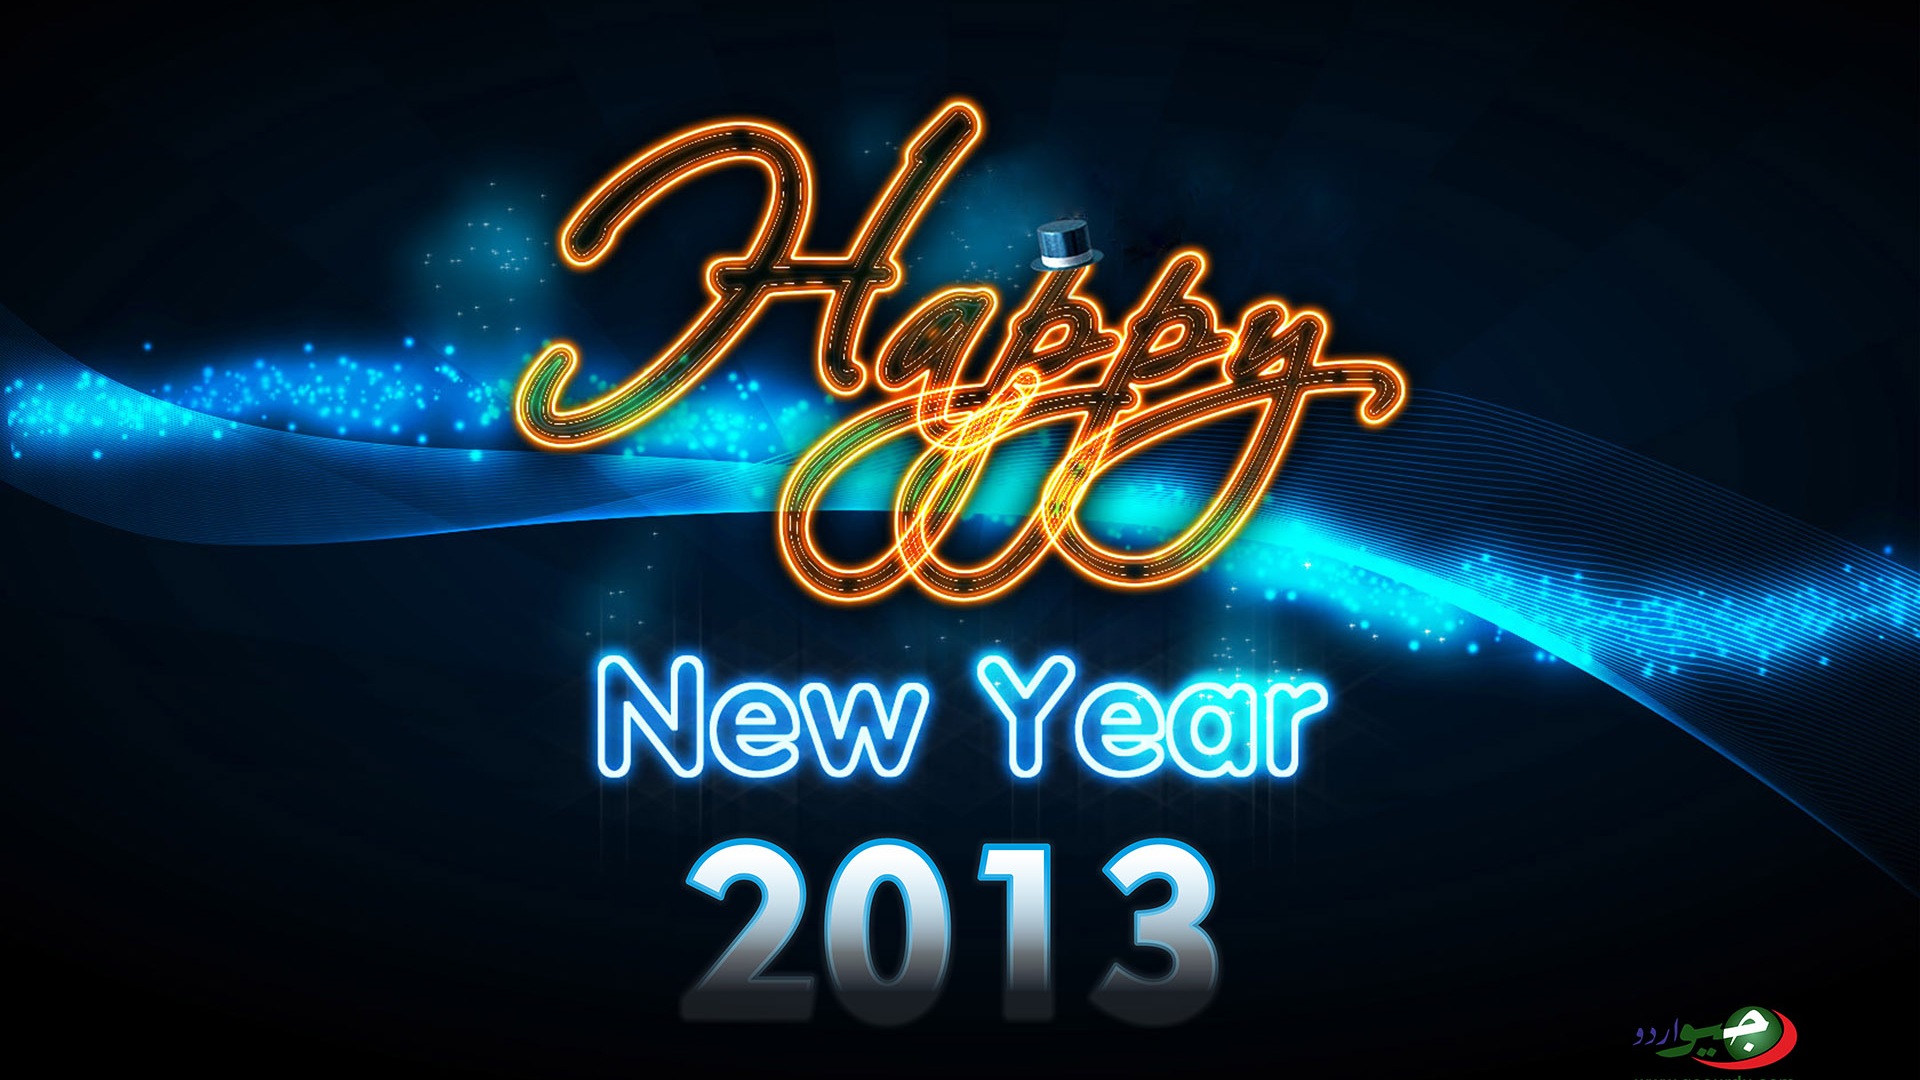 2013 Happy New Year HD wallpapers #17 - 1920x1080